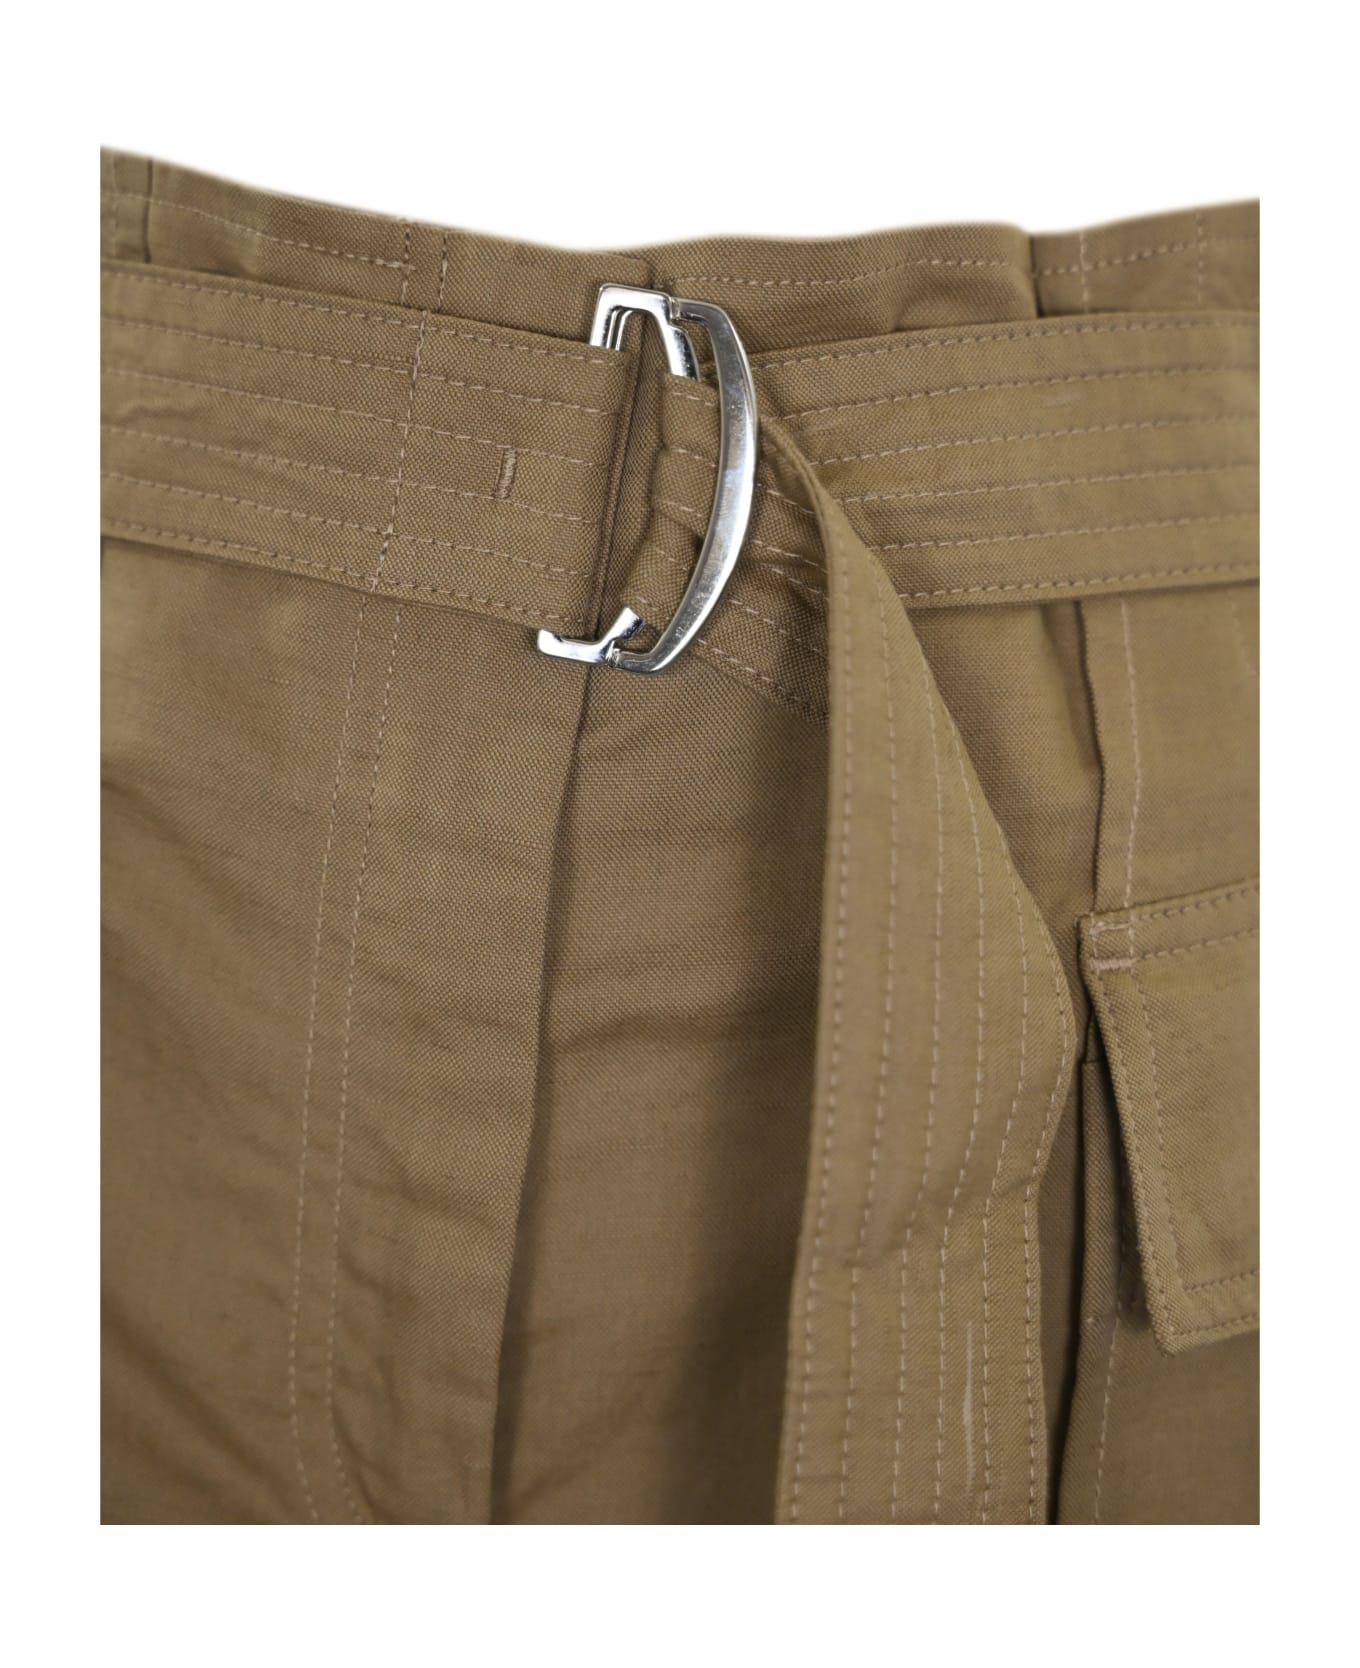 Weekend Max Mara 'pinide' Trousers In Linen And Cotton - Beige